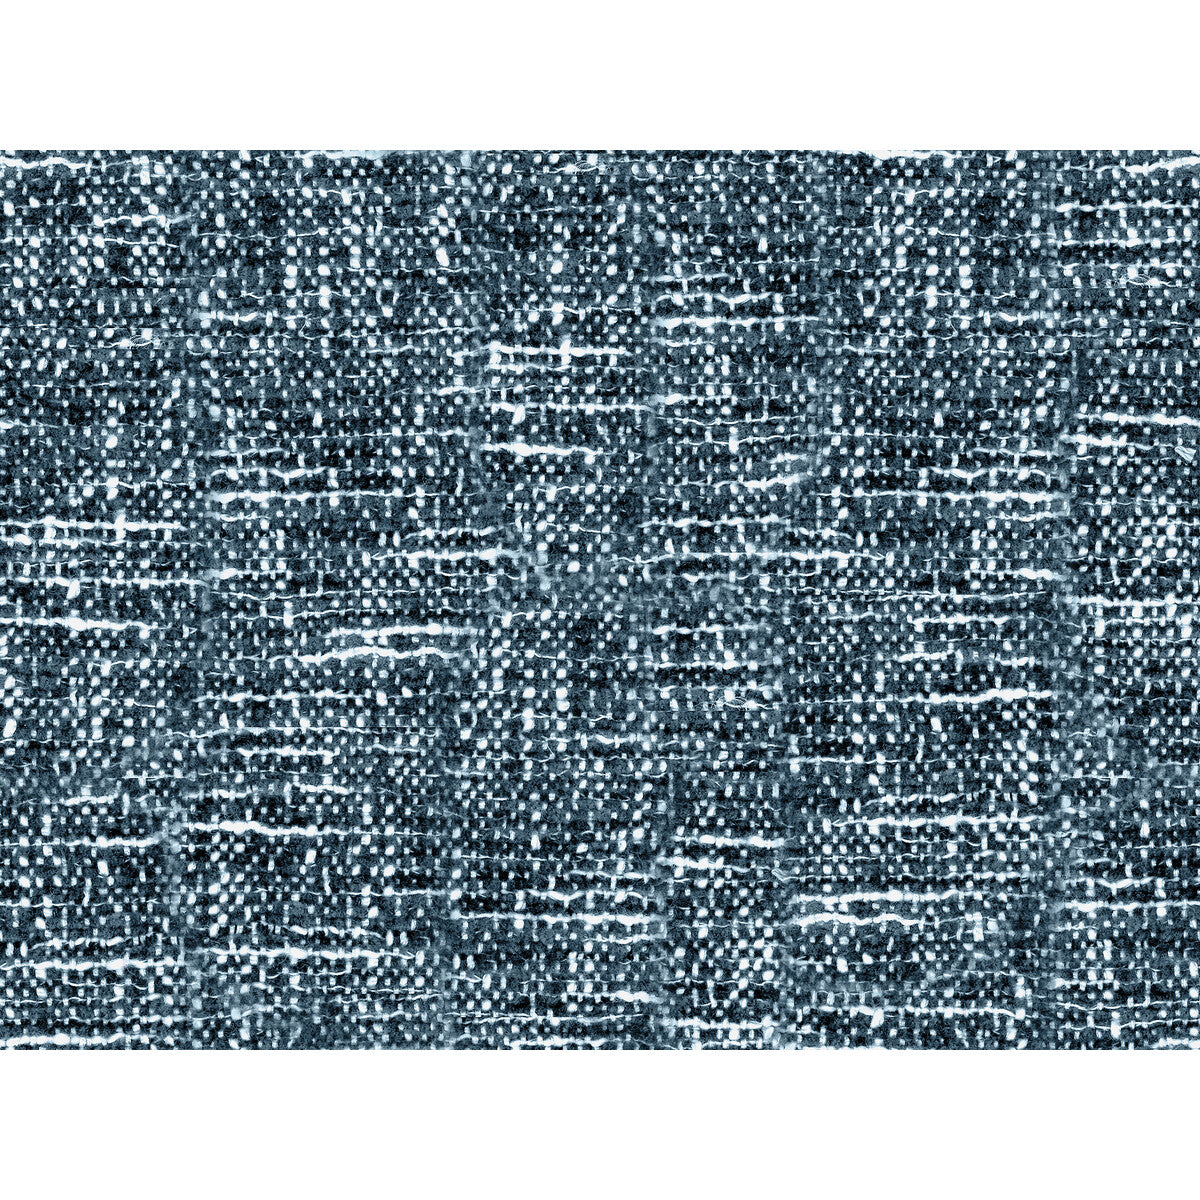 Tinge fabric in teal color - pattern GWF-3720.53.0 - by Lee Jofa Modern in the Kelly Wearstler Textures collection